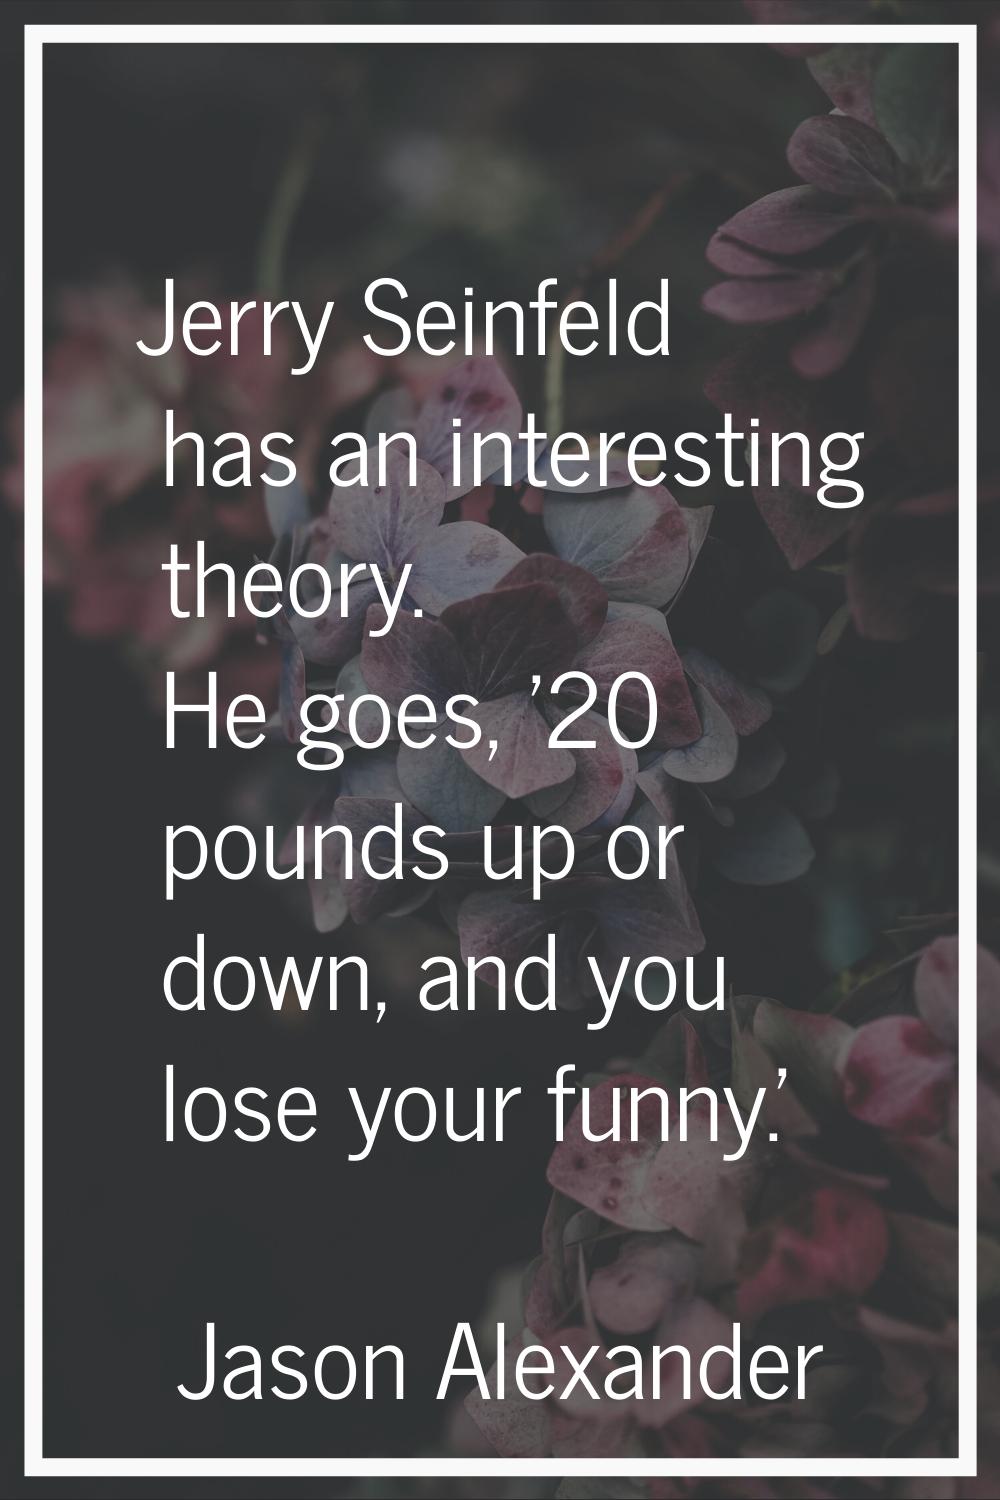 Jerry Seinfeld has an interesting theory. He goes, '20 pounds up or down, and you lose your funny.'